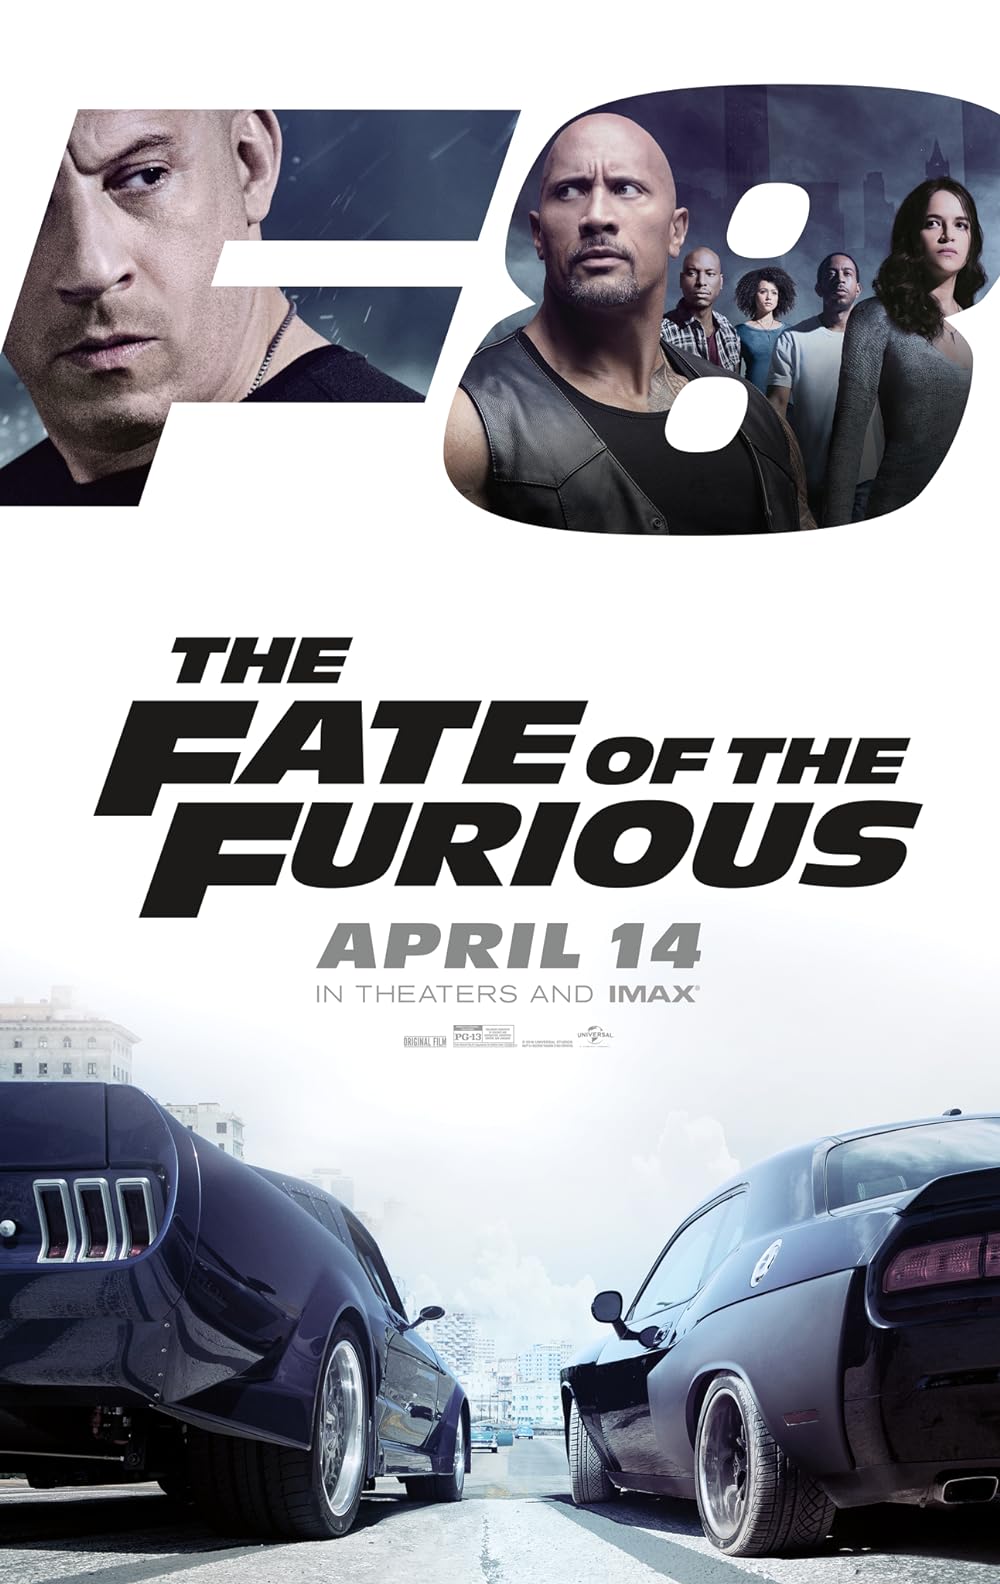 Download The Fate of the Furious (2017) BluRay Dual Audio Hindi ORG 1080p | 720p | 480p [400MB] download